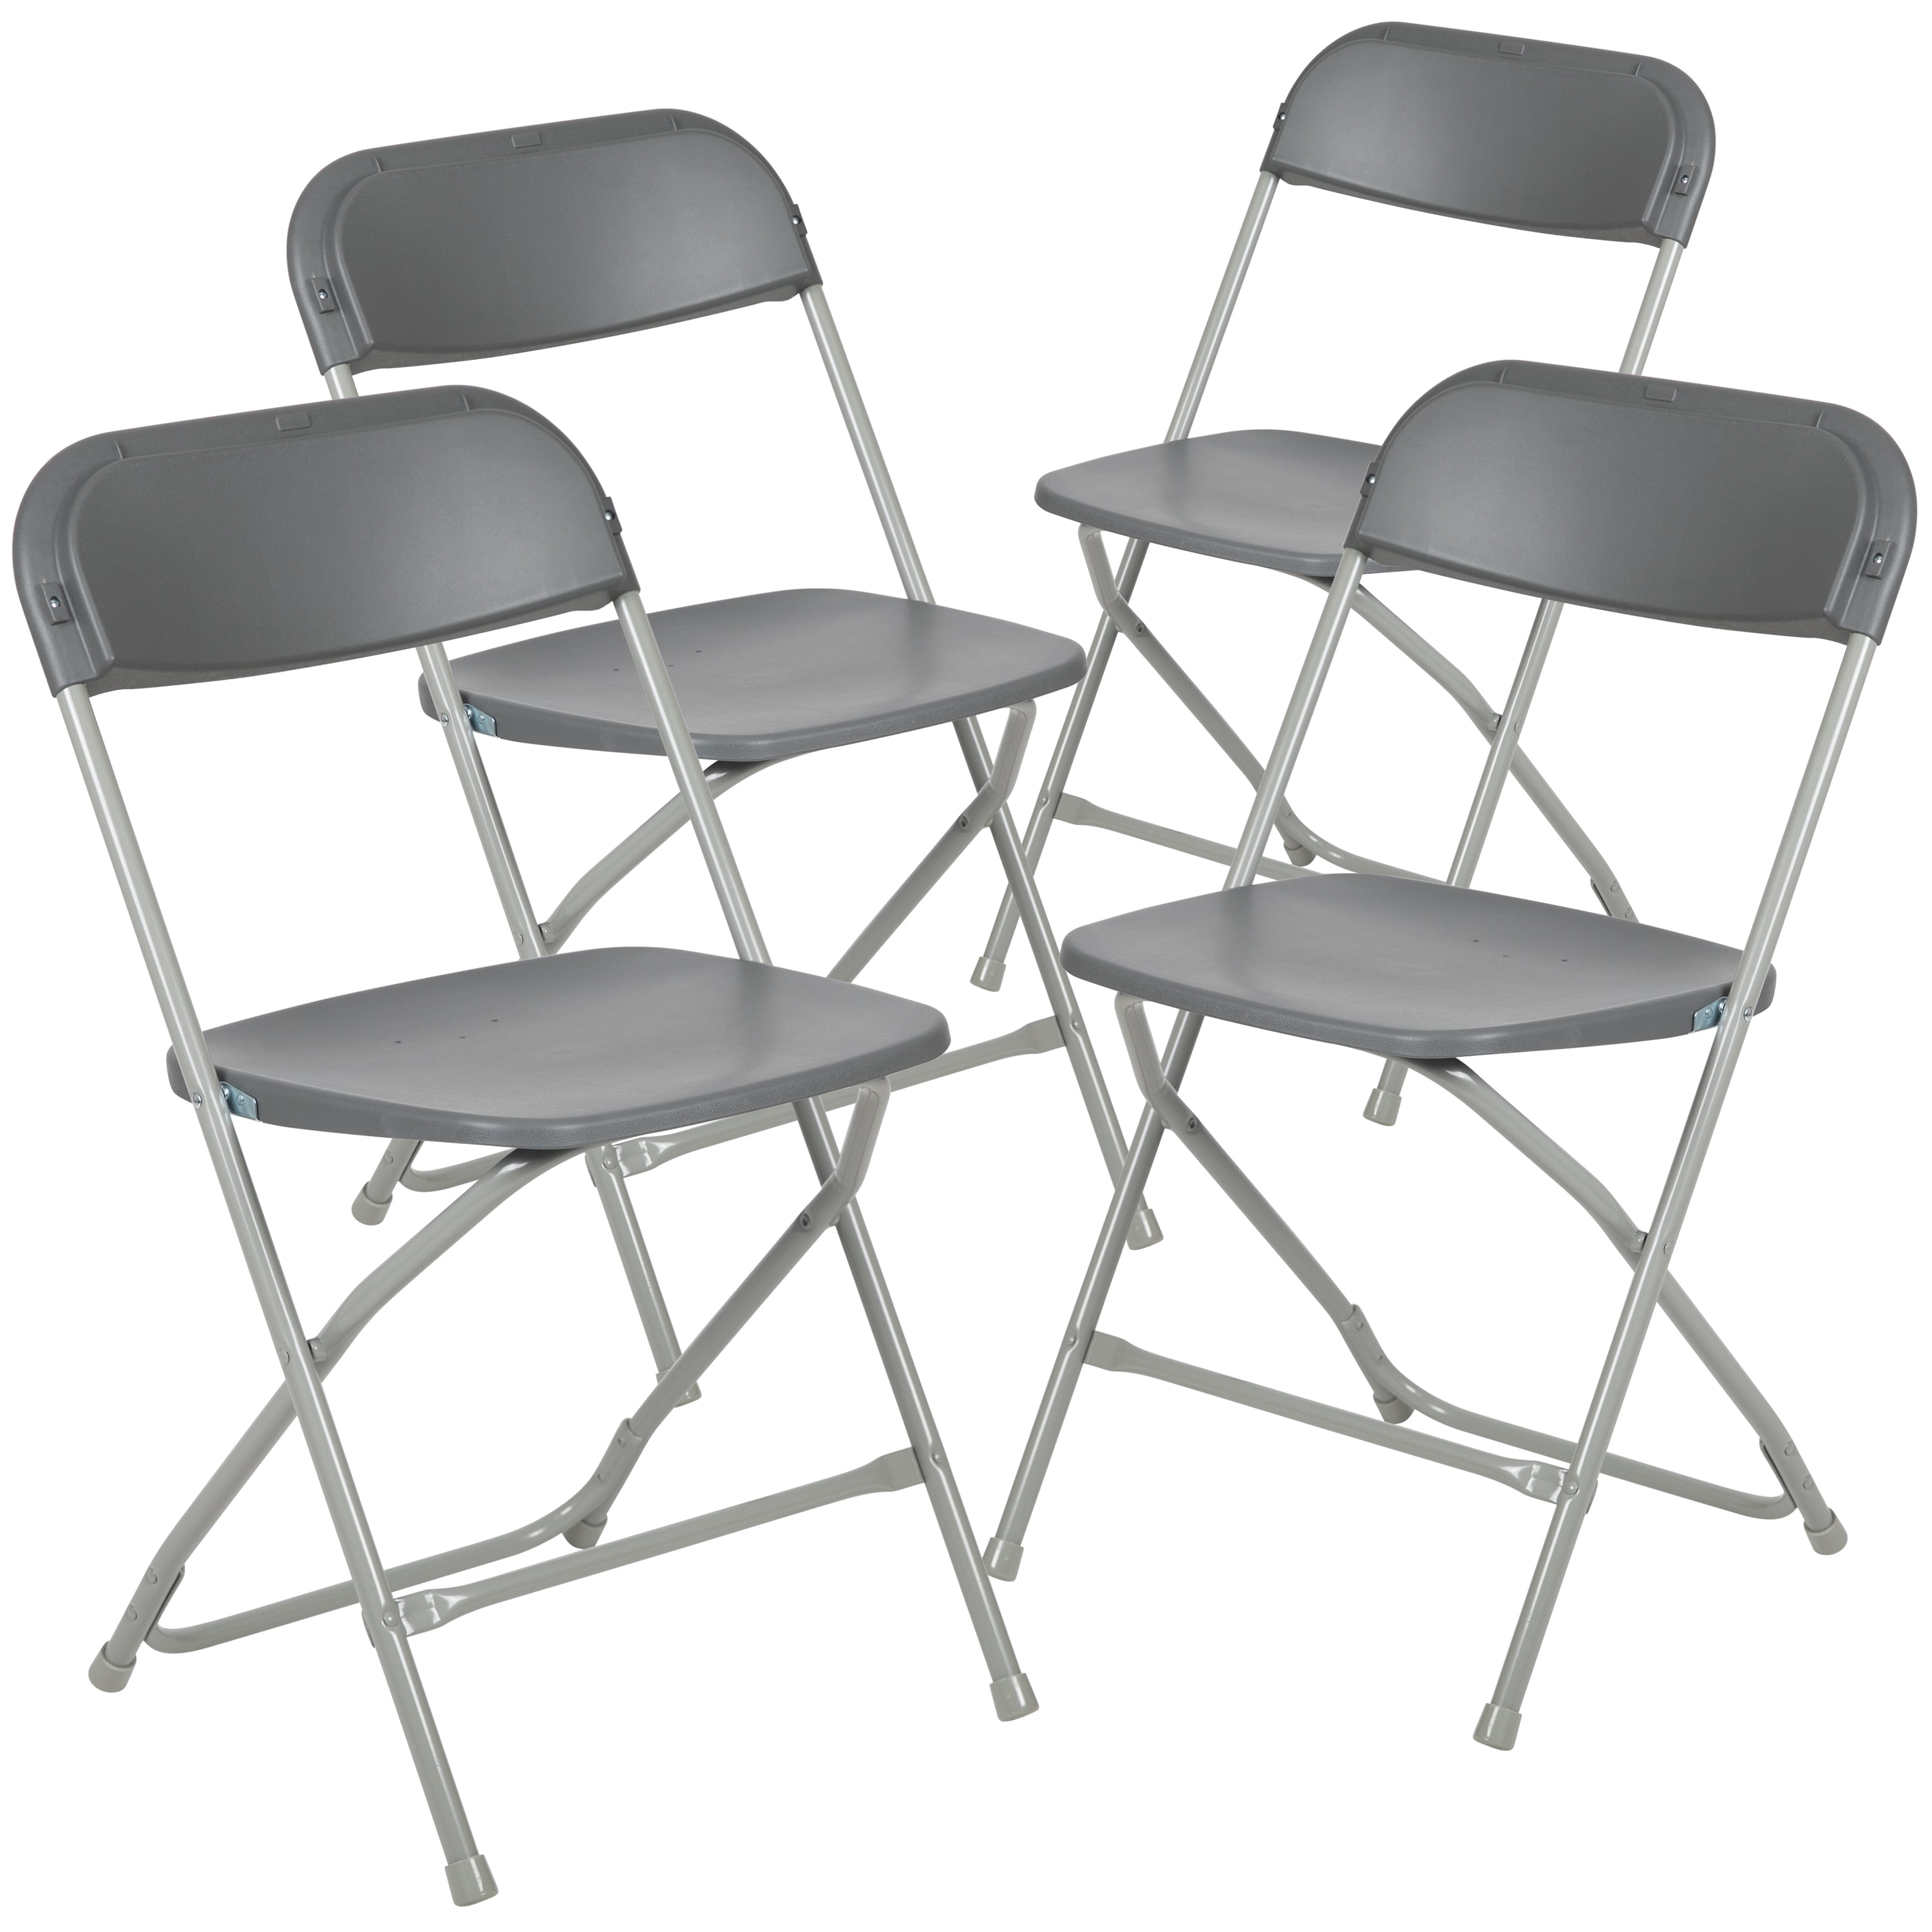 20 Pack White Plastic Folding Chair Heavy Duty Wedding Event Commercial Chairs 